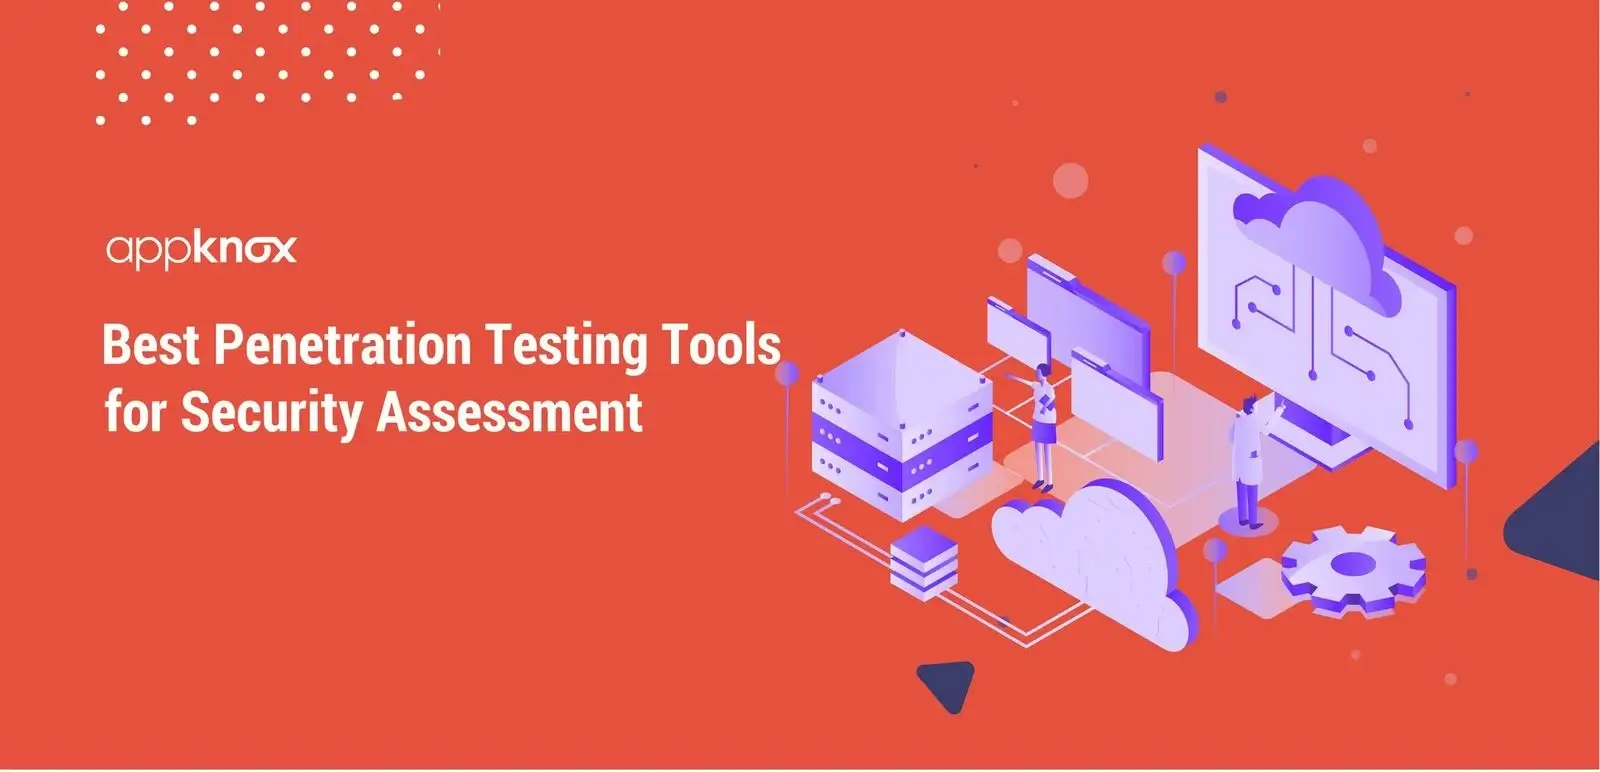 Powerful Penetration Testing Tools for Security Assessment